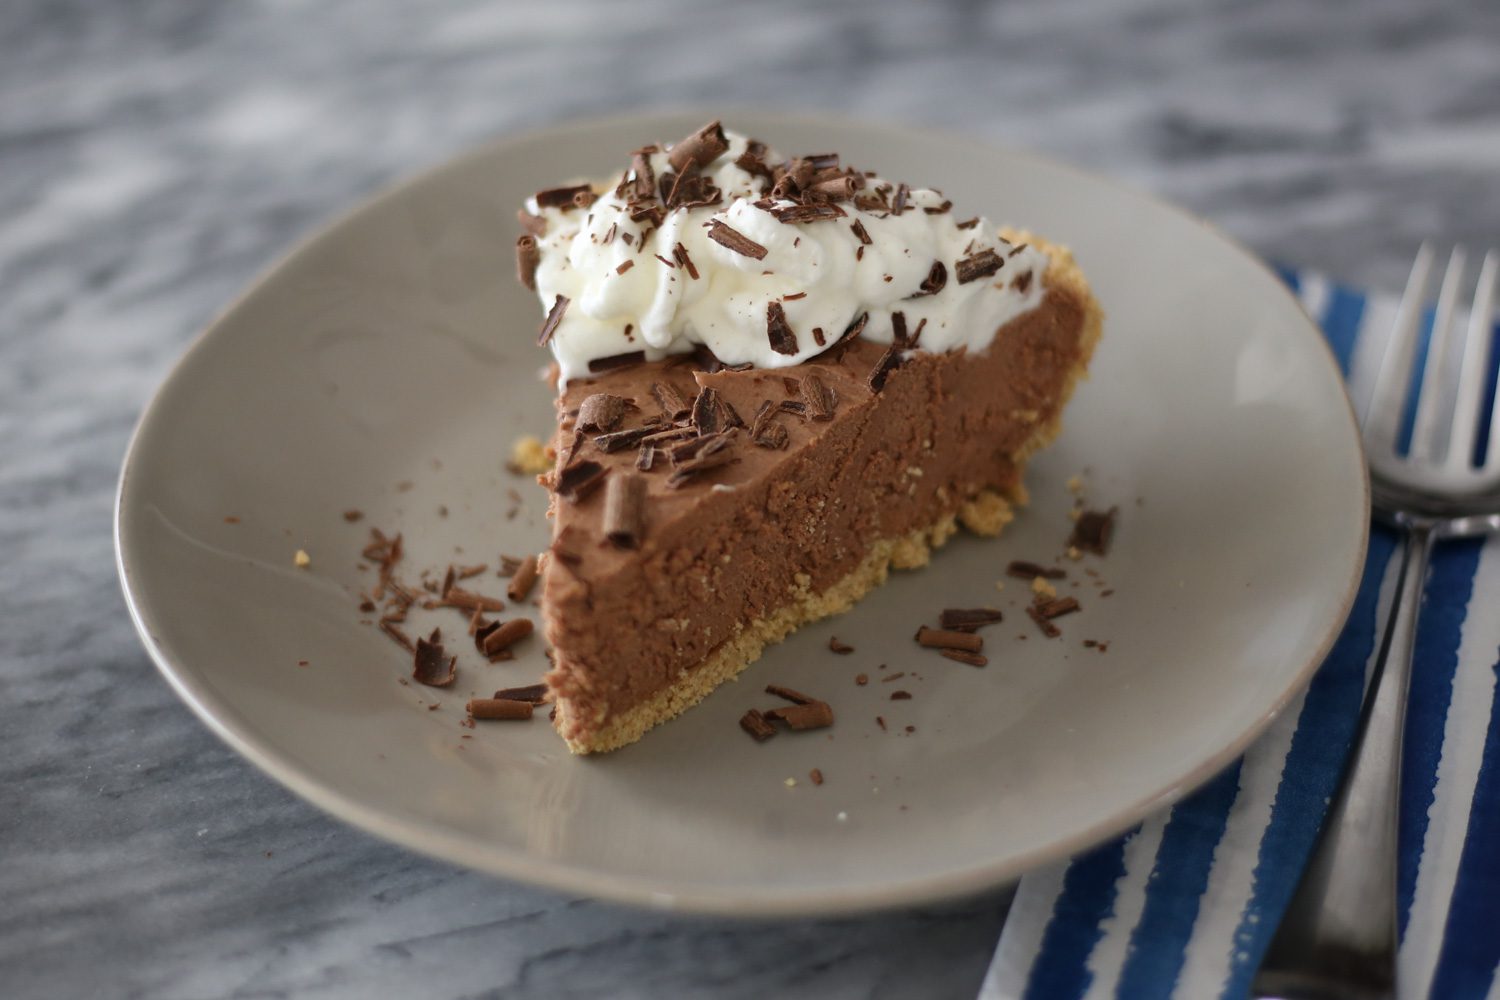 A chocolate amaretto pie garnished with whipped cream and chocolate